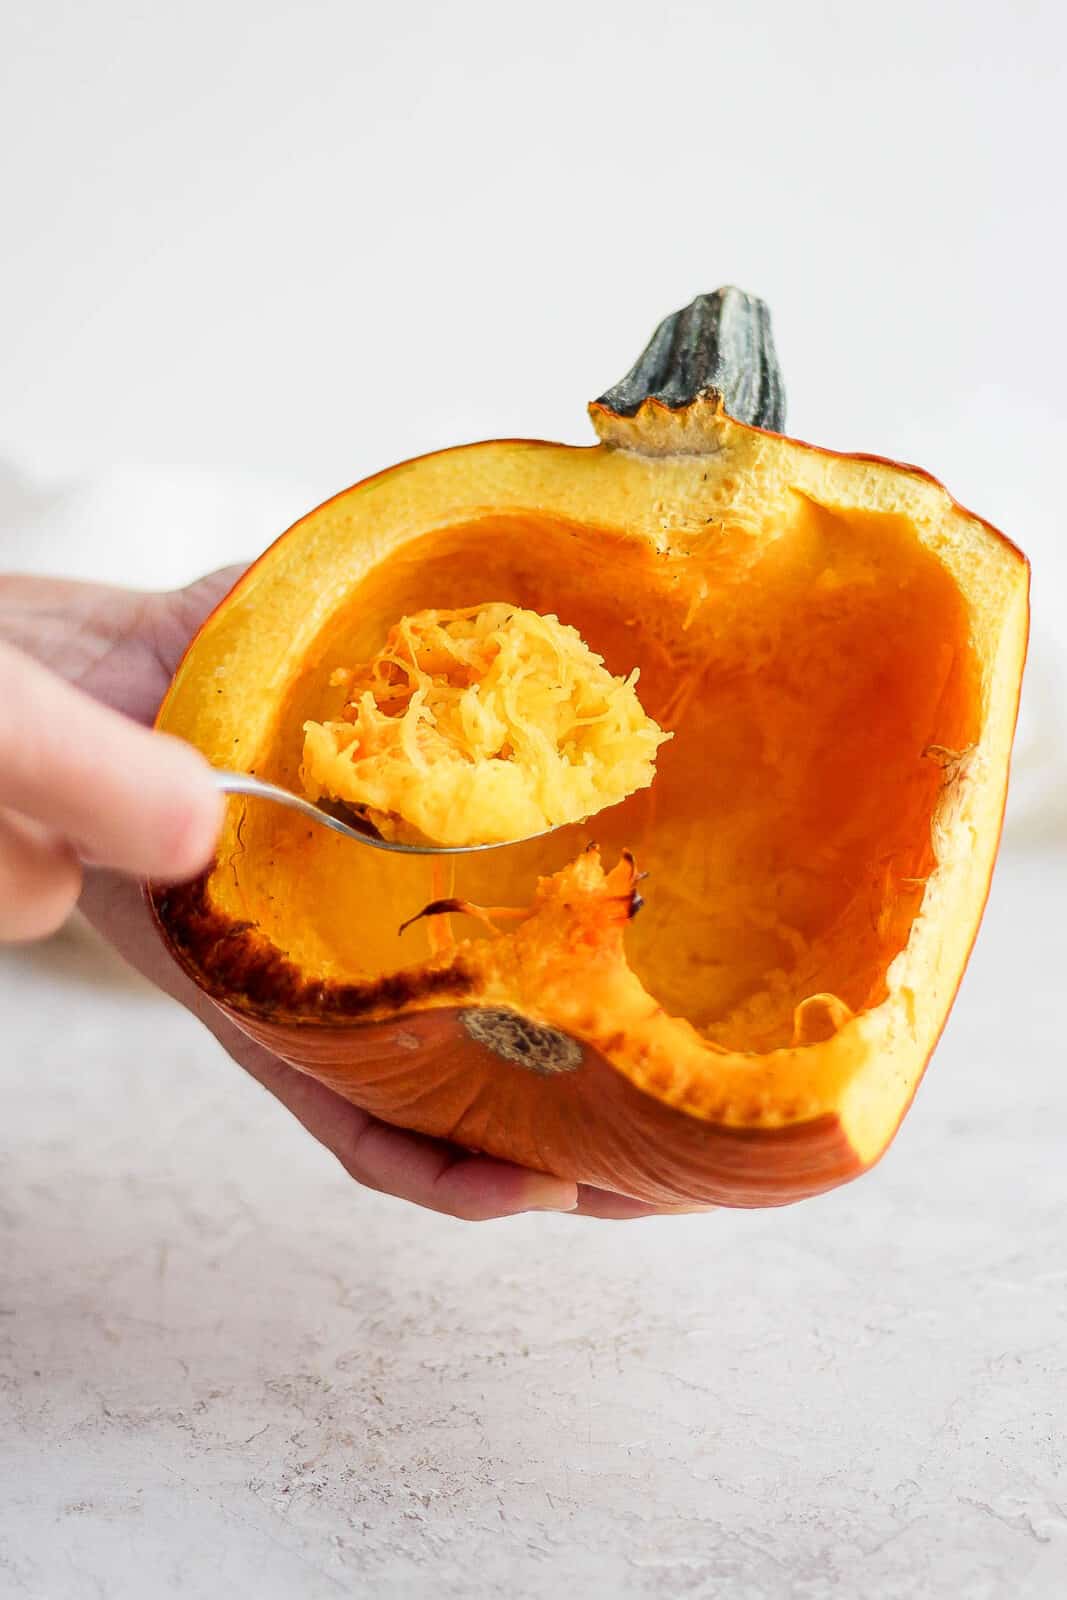 A spoon scooping the cooked pumpkin out of the shell.